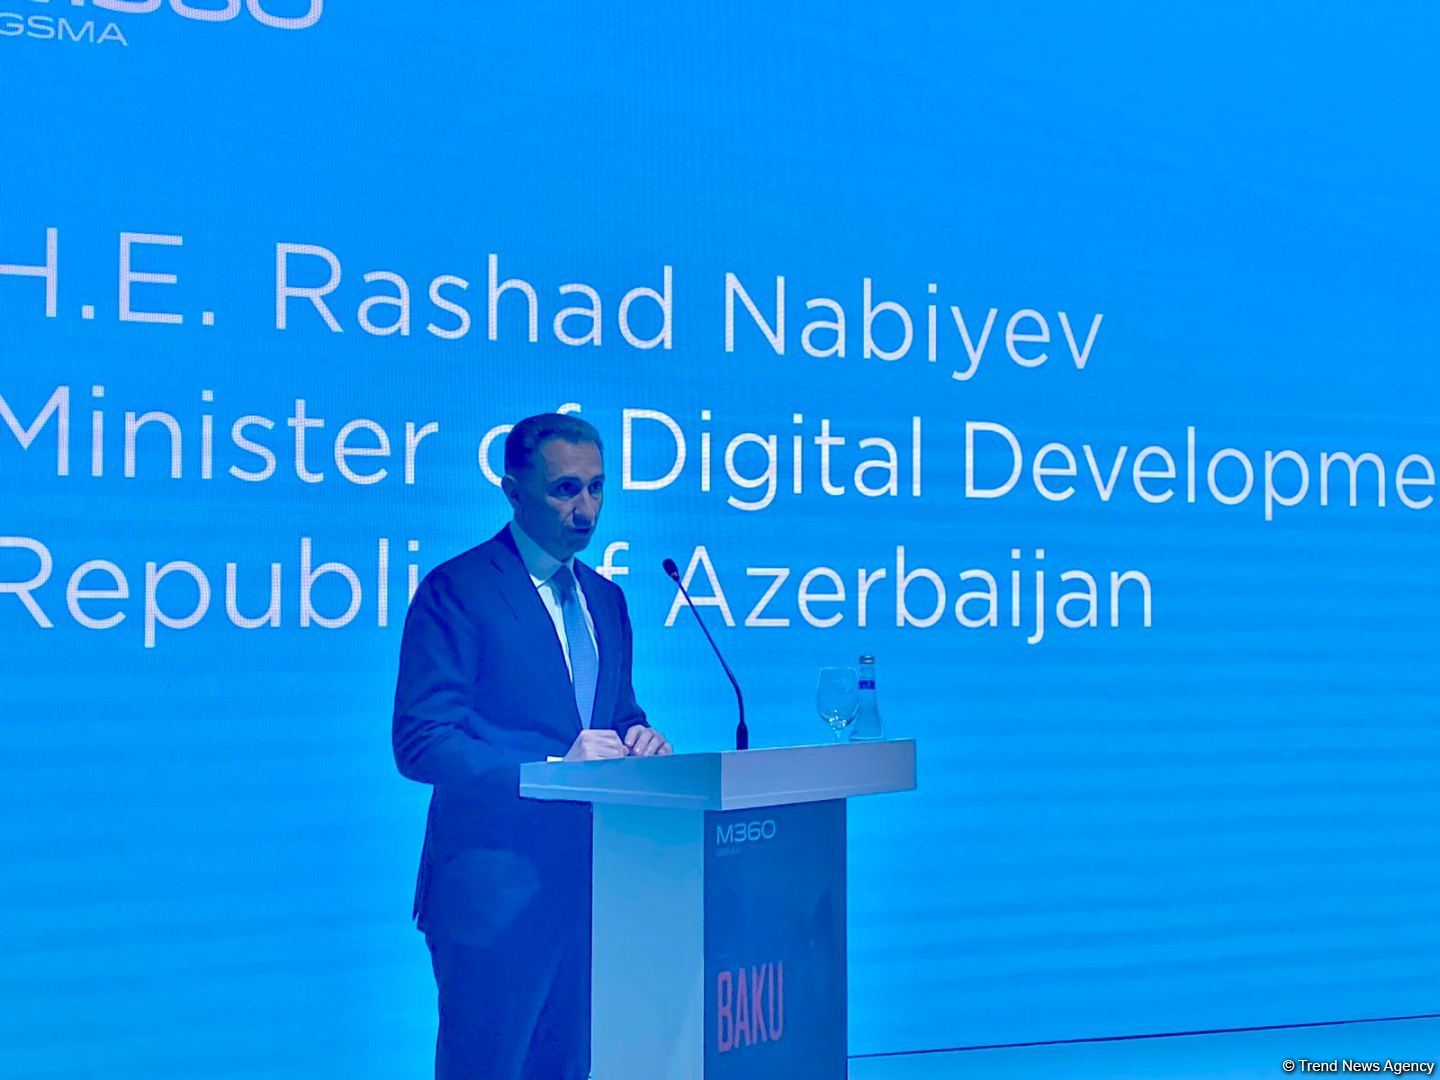 Mobile communication sector of Azerbaijan reaches new level of dev't - minister